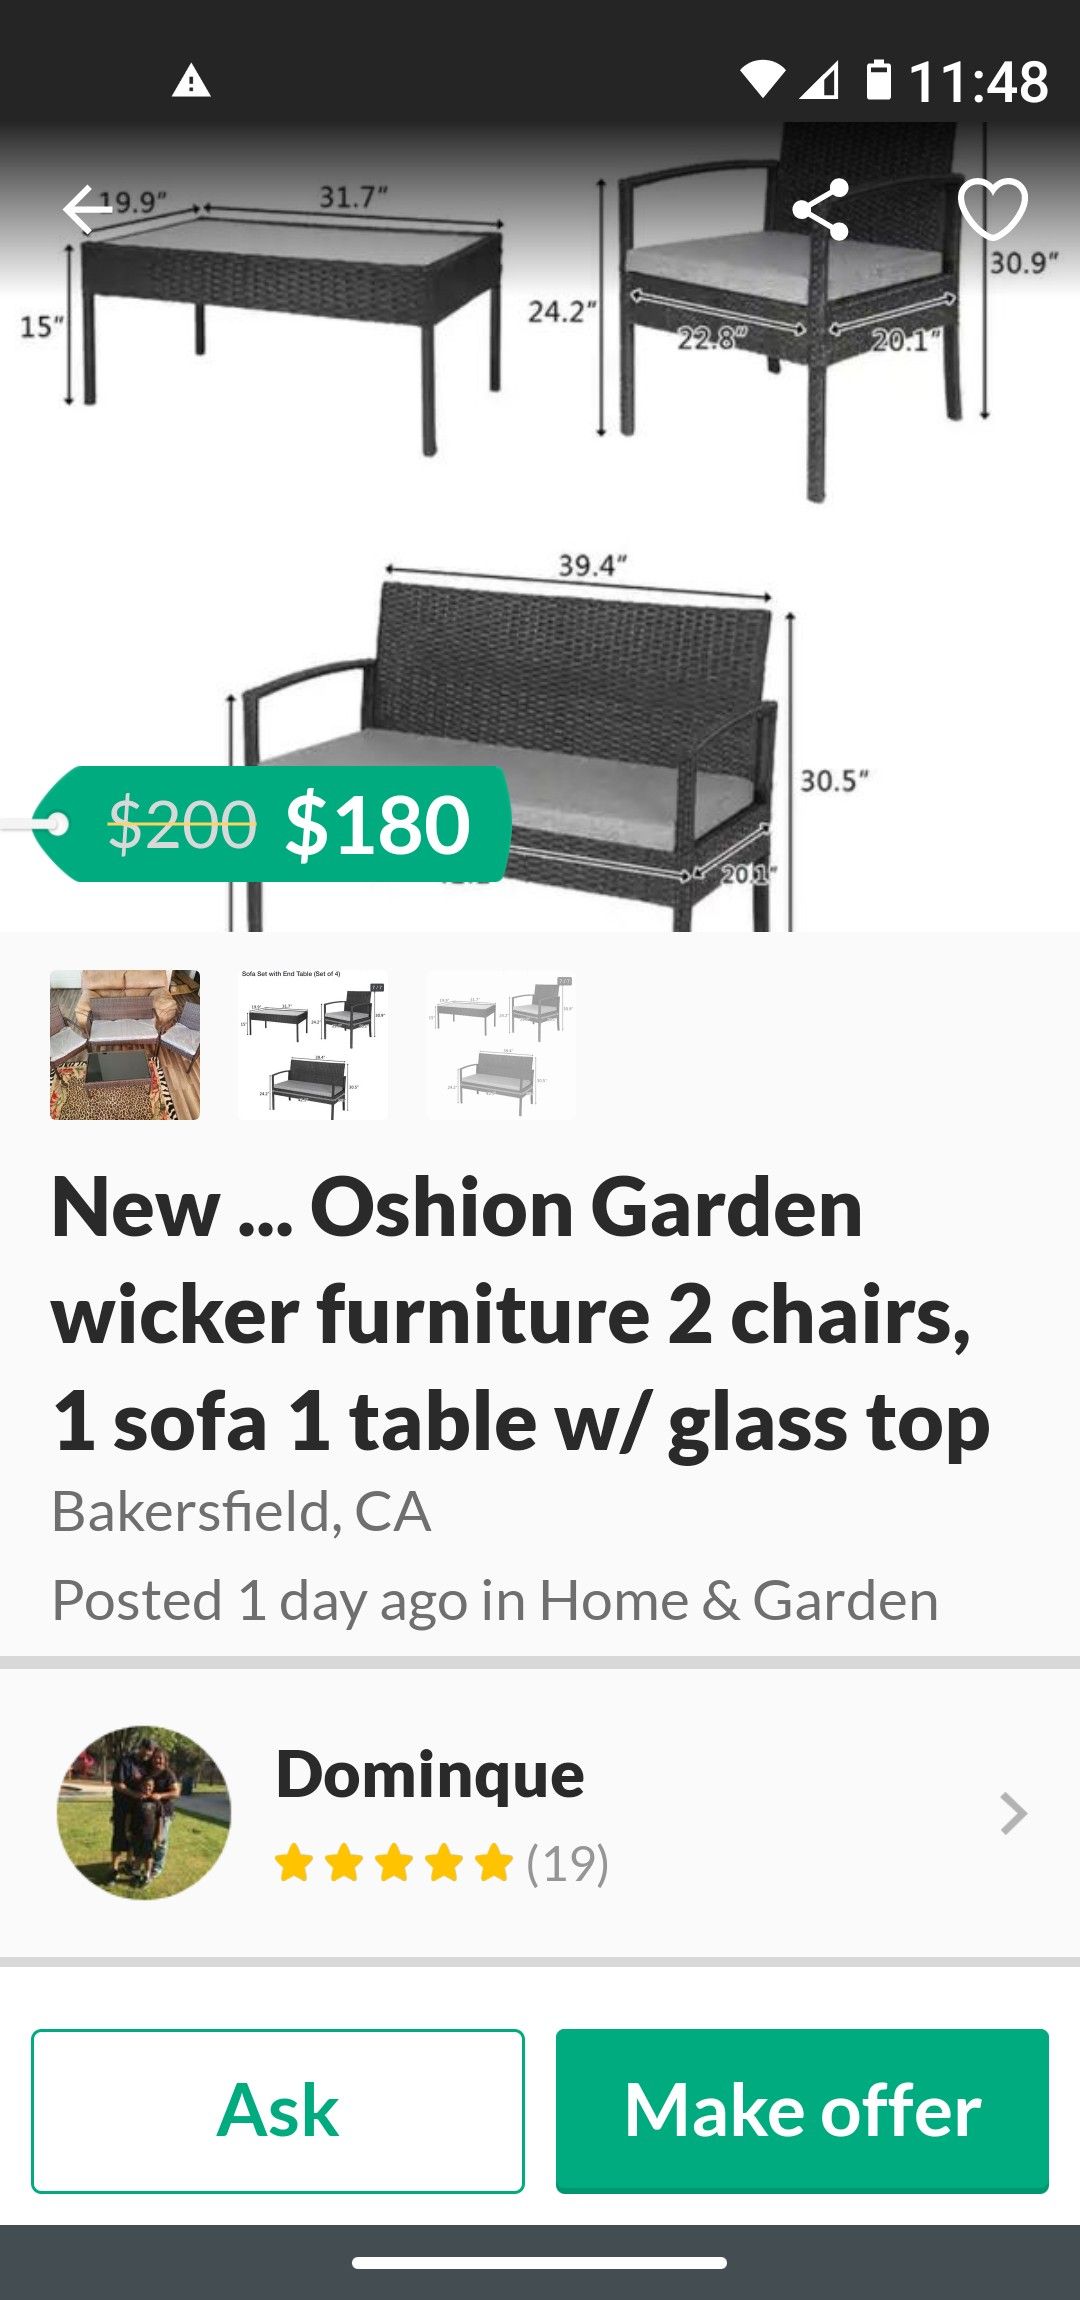 Oshion outdoor furniture 2 chairs 1 sofa with glad table top